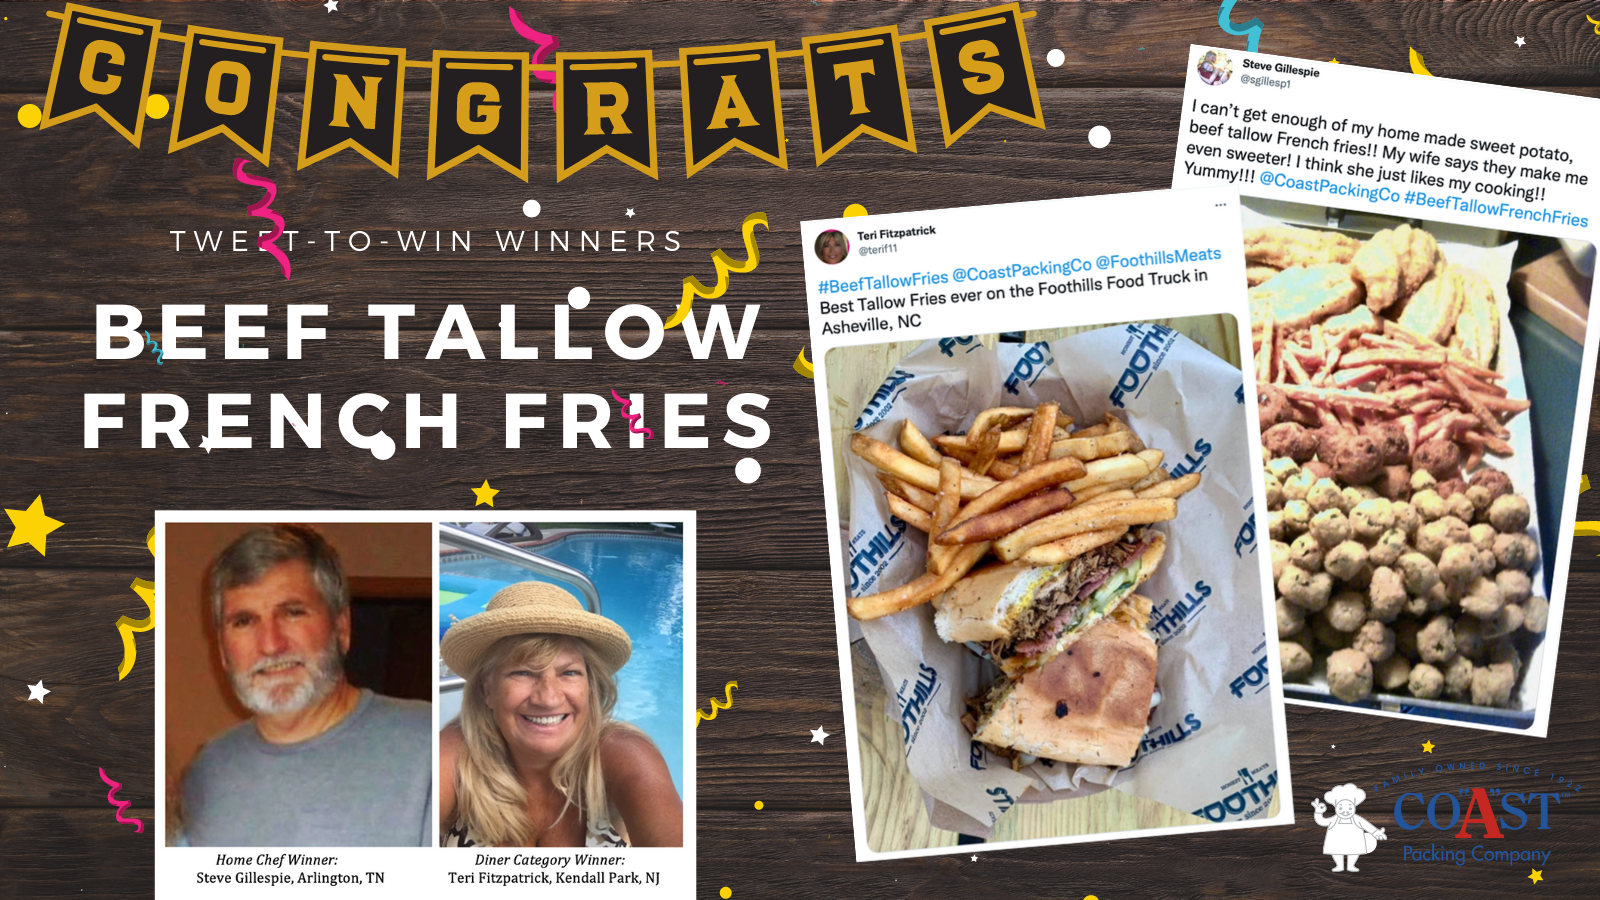 #BeefTallowFrenchFries Fans Steve Gillespie and Teri Fitzpatrick Wax Poetic in Coast Packing Co.’s 4th Annual ‘Tweet-to-Win’ Contest – And Bring the Sizzle Home